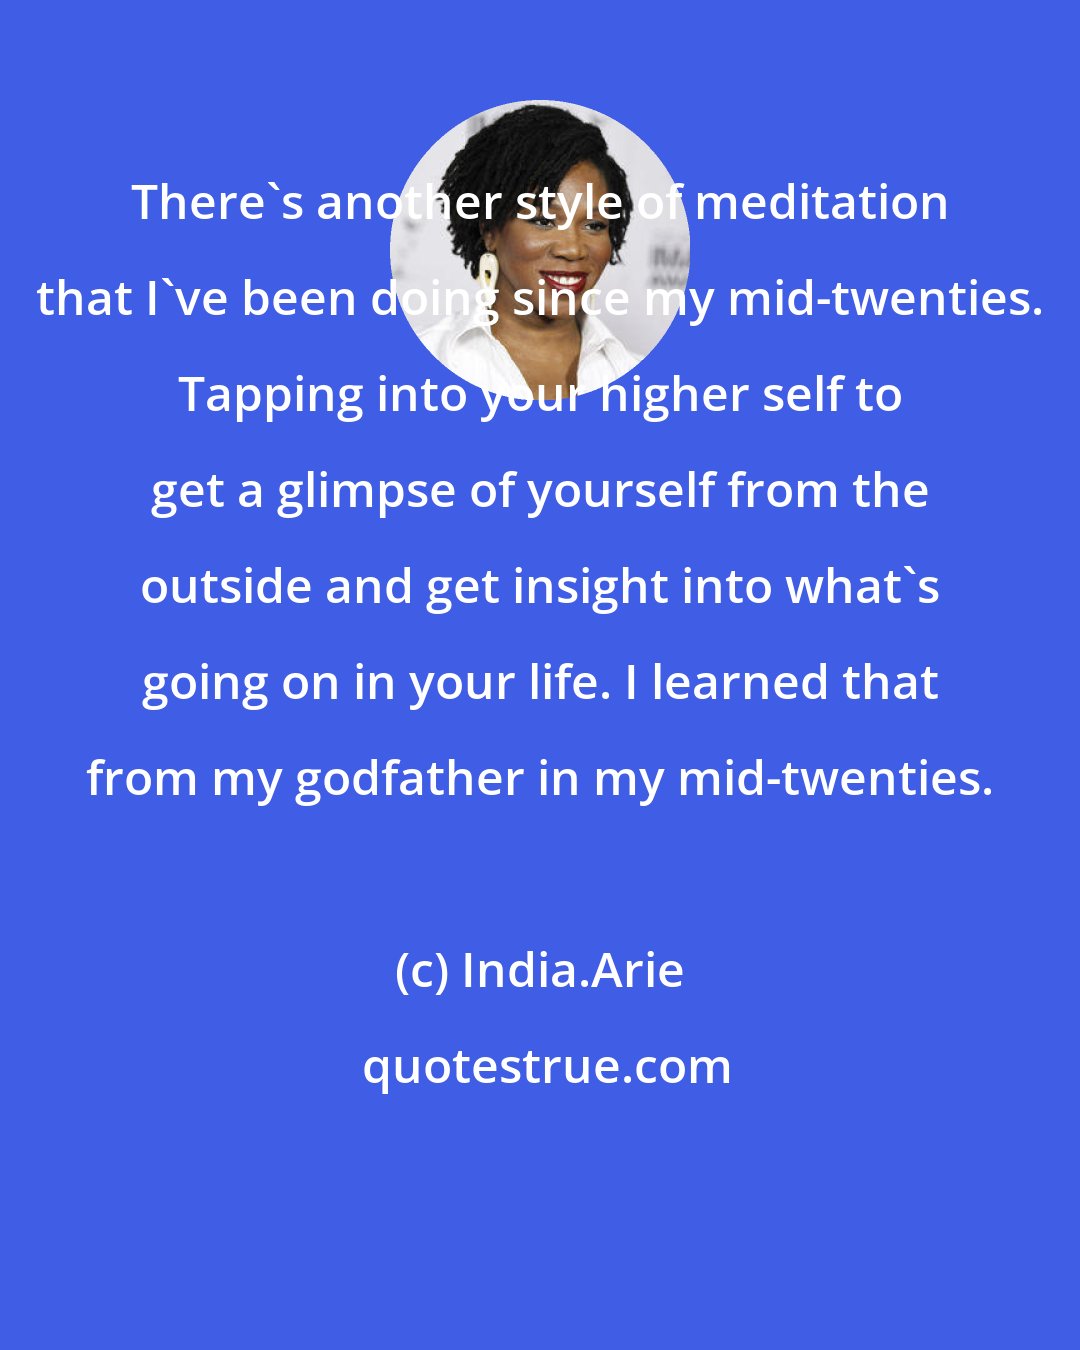 India.Arie: There's another style of meditation that I've been doing since my mid-twenties. Tapping into your higher self to get a glimpse of yourself from the outside and get insight into what's going on in your life. I learned that from my godfather in my mid-twenties.